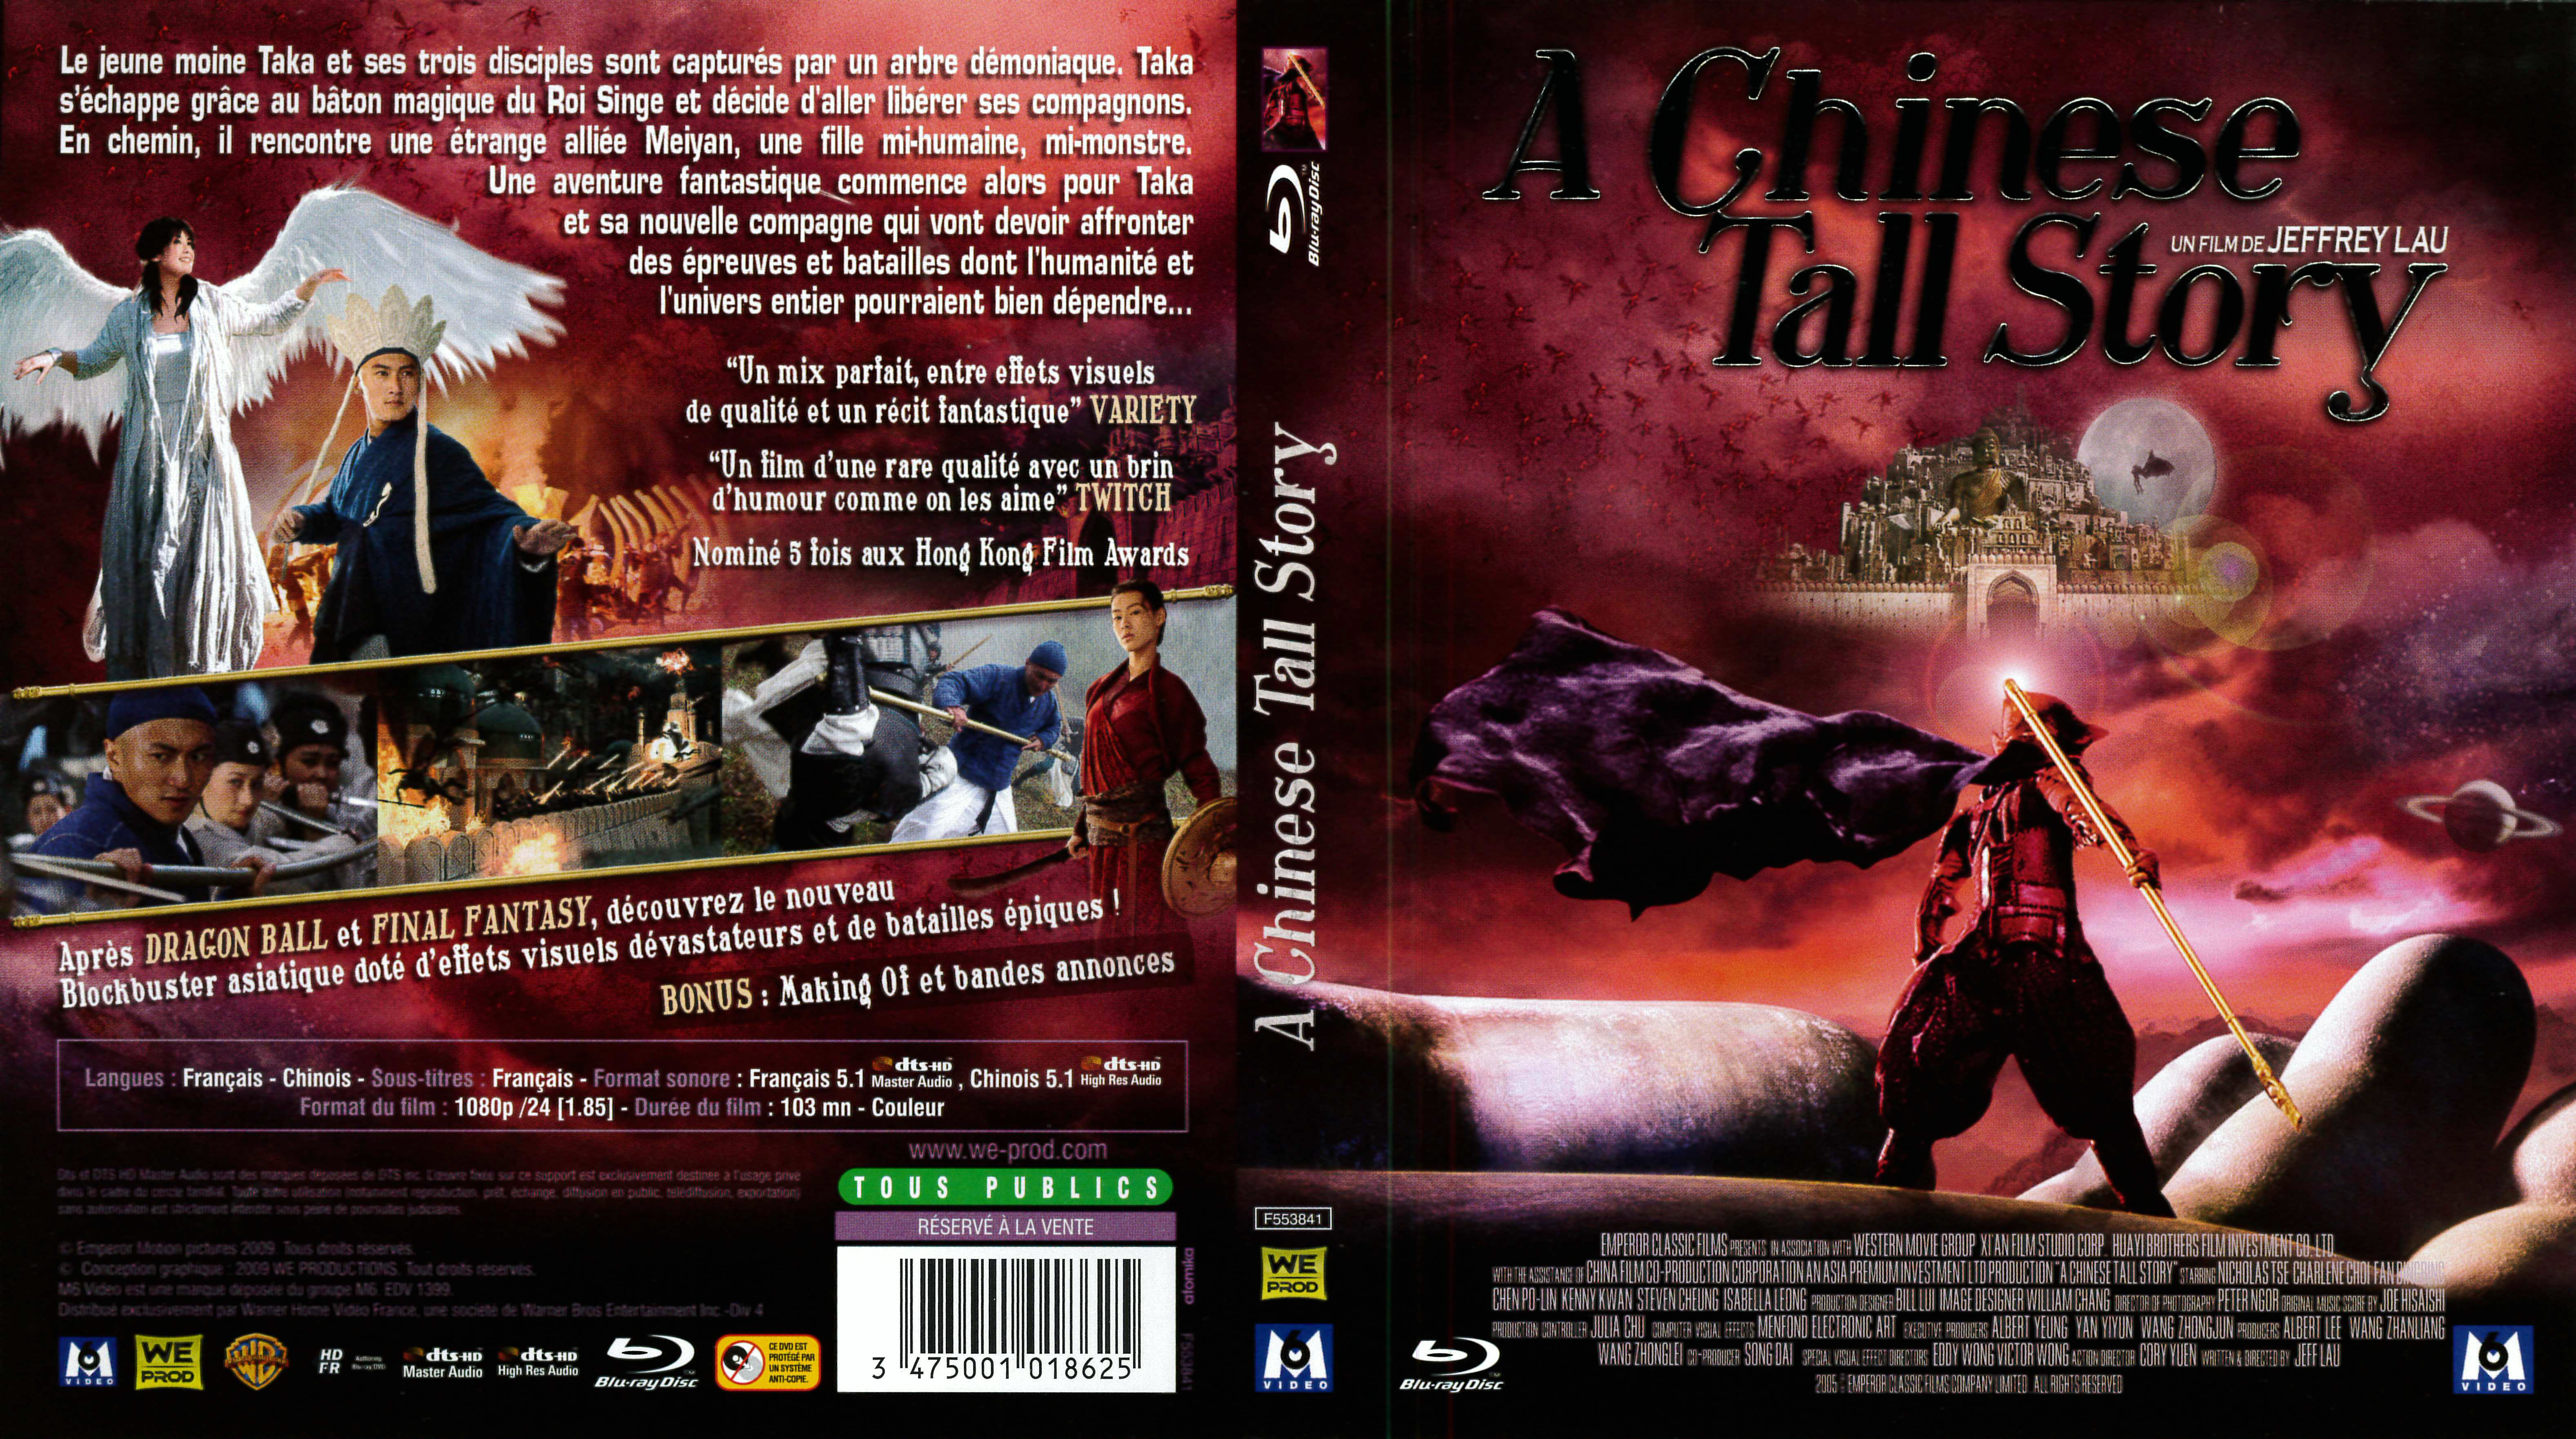 Jaquette DVD A chinese tall story (BLU-RAY)